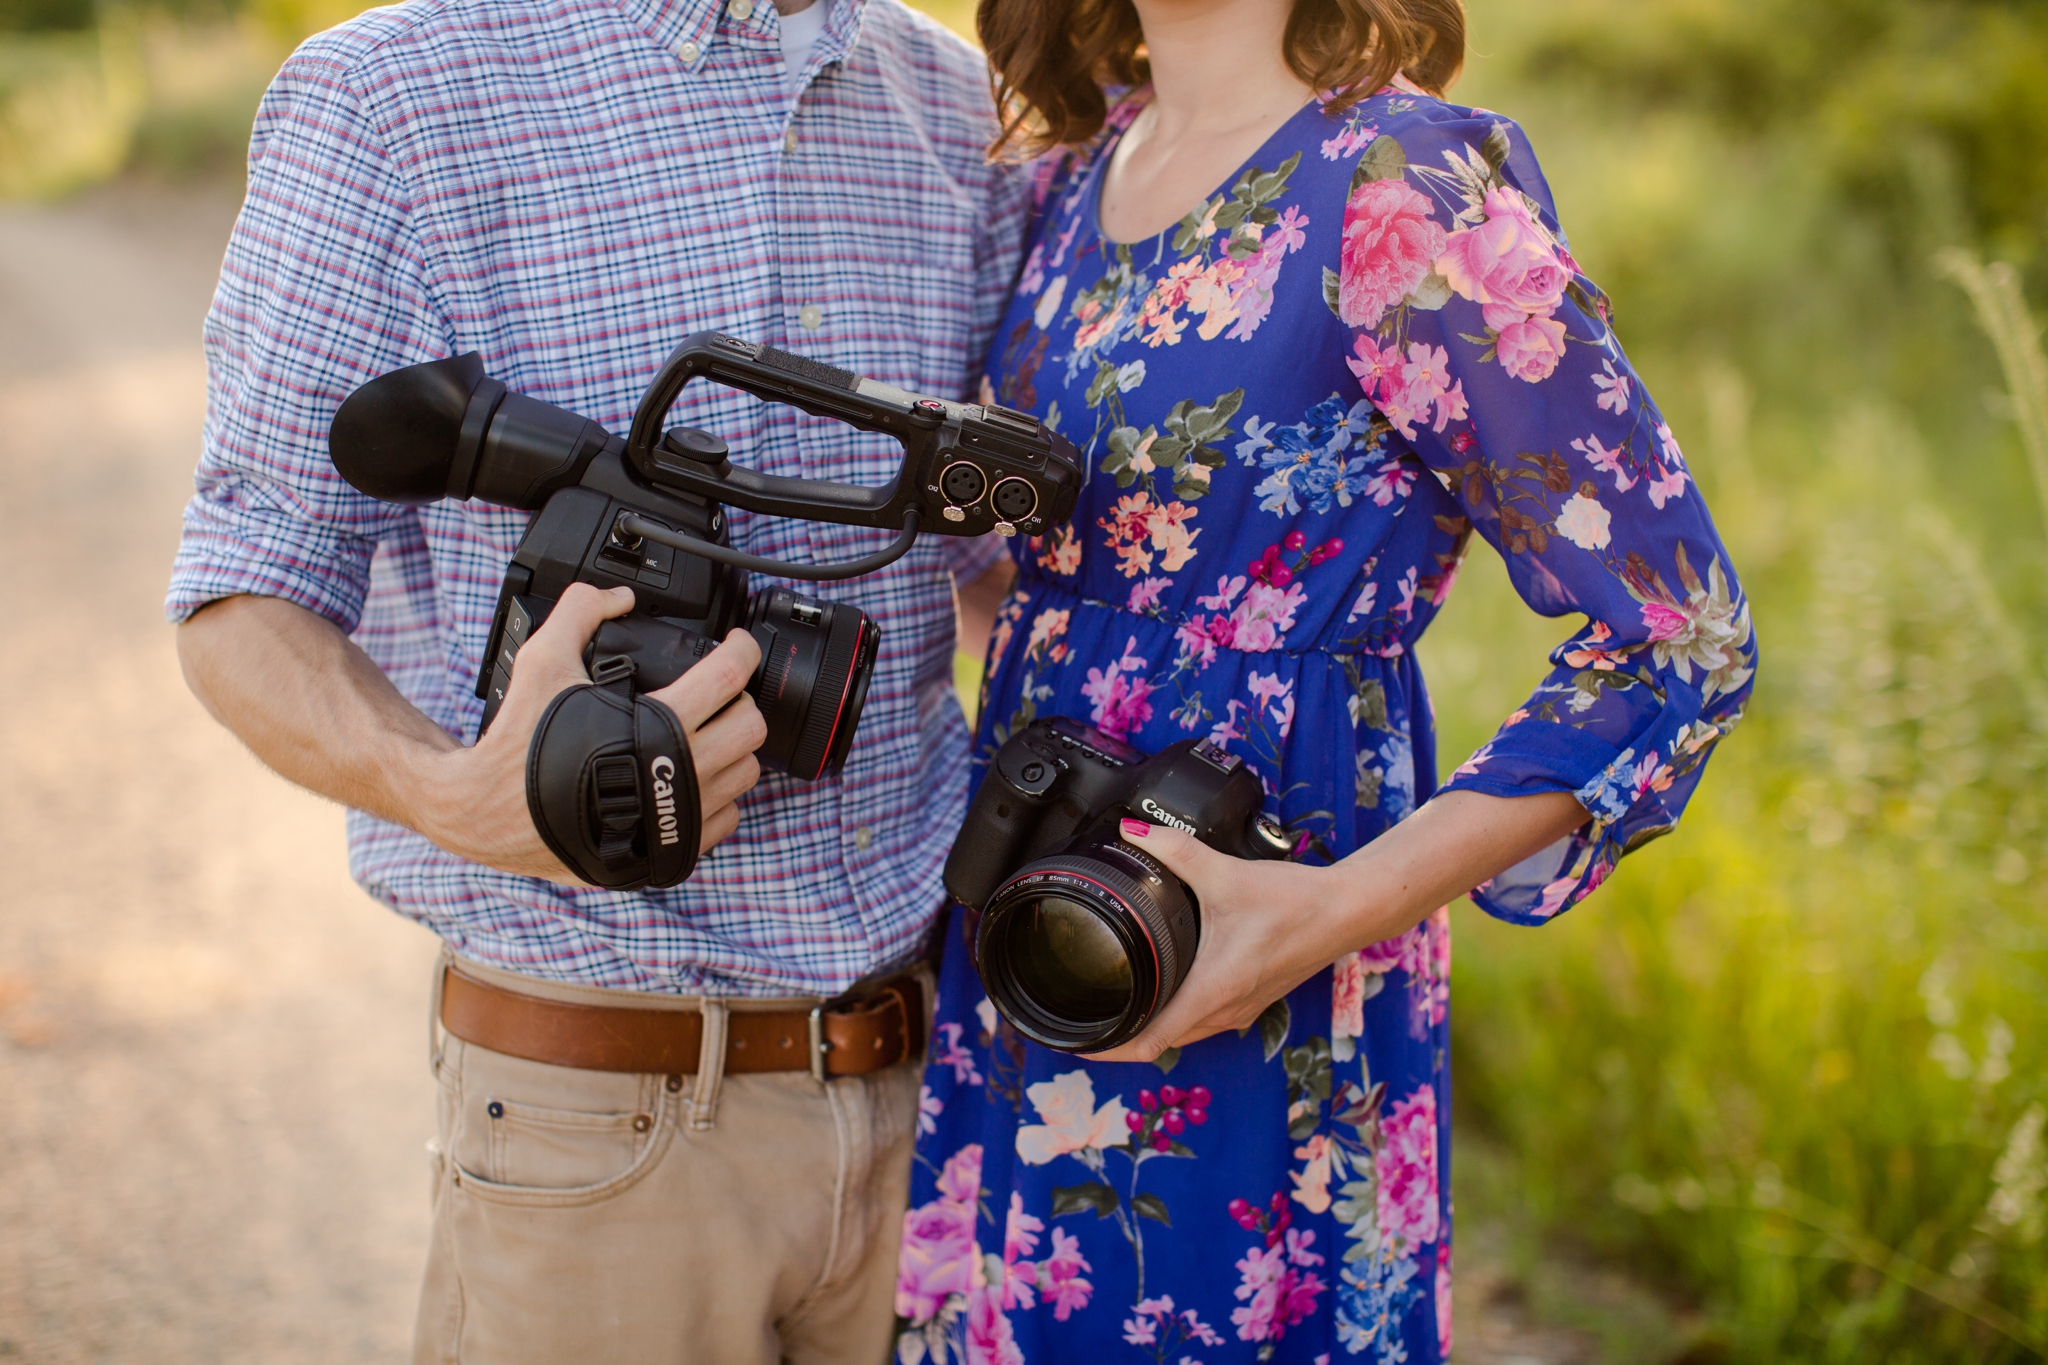 The Importance of Shooting with Dual Card Slots, Brittney and Caleb